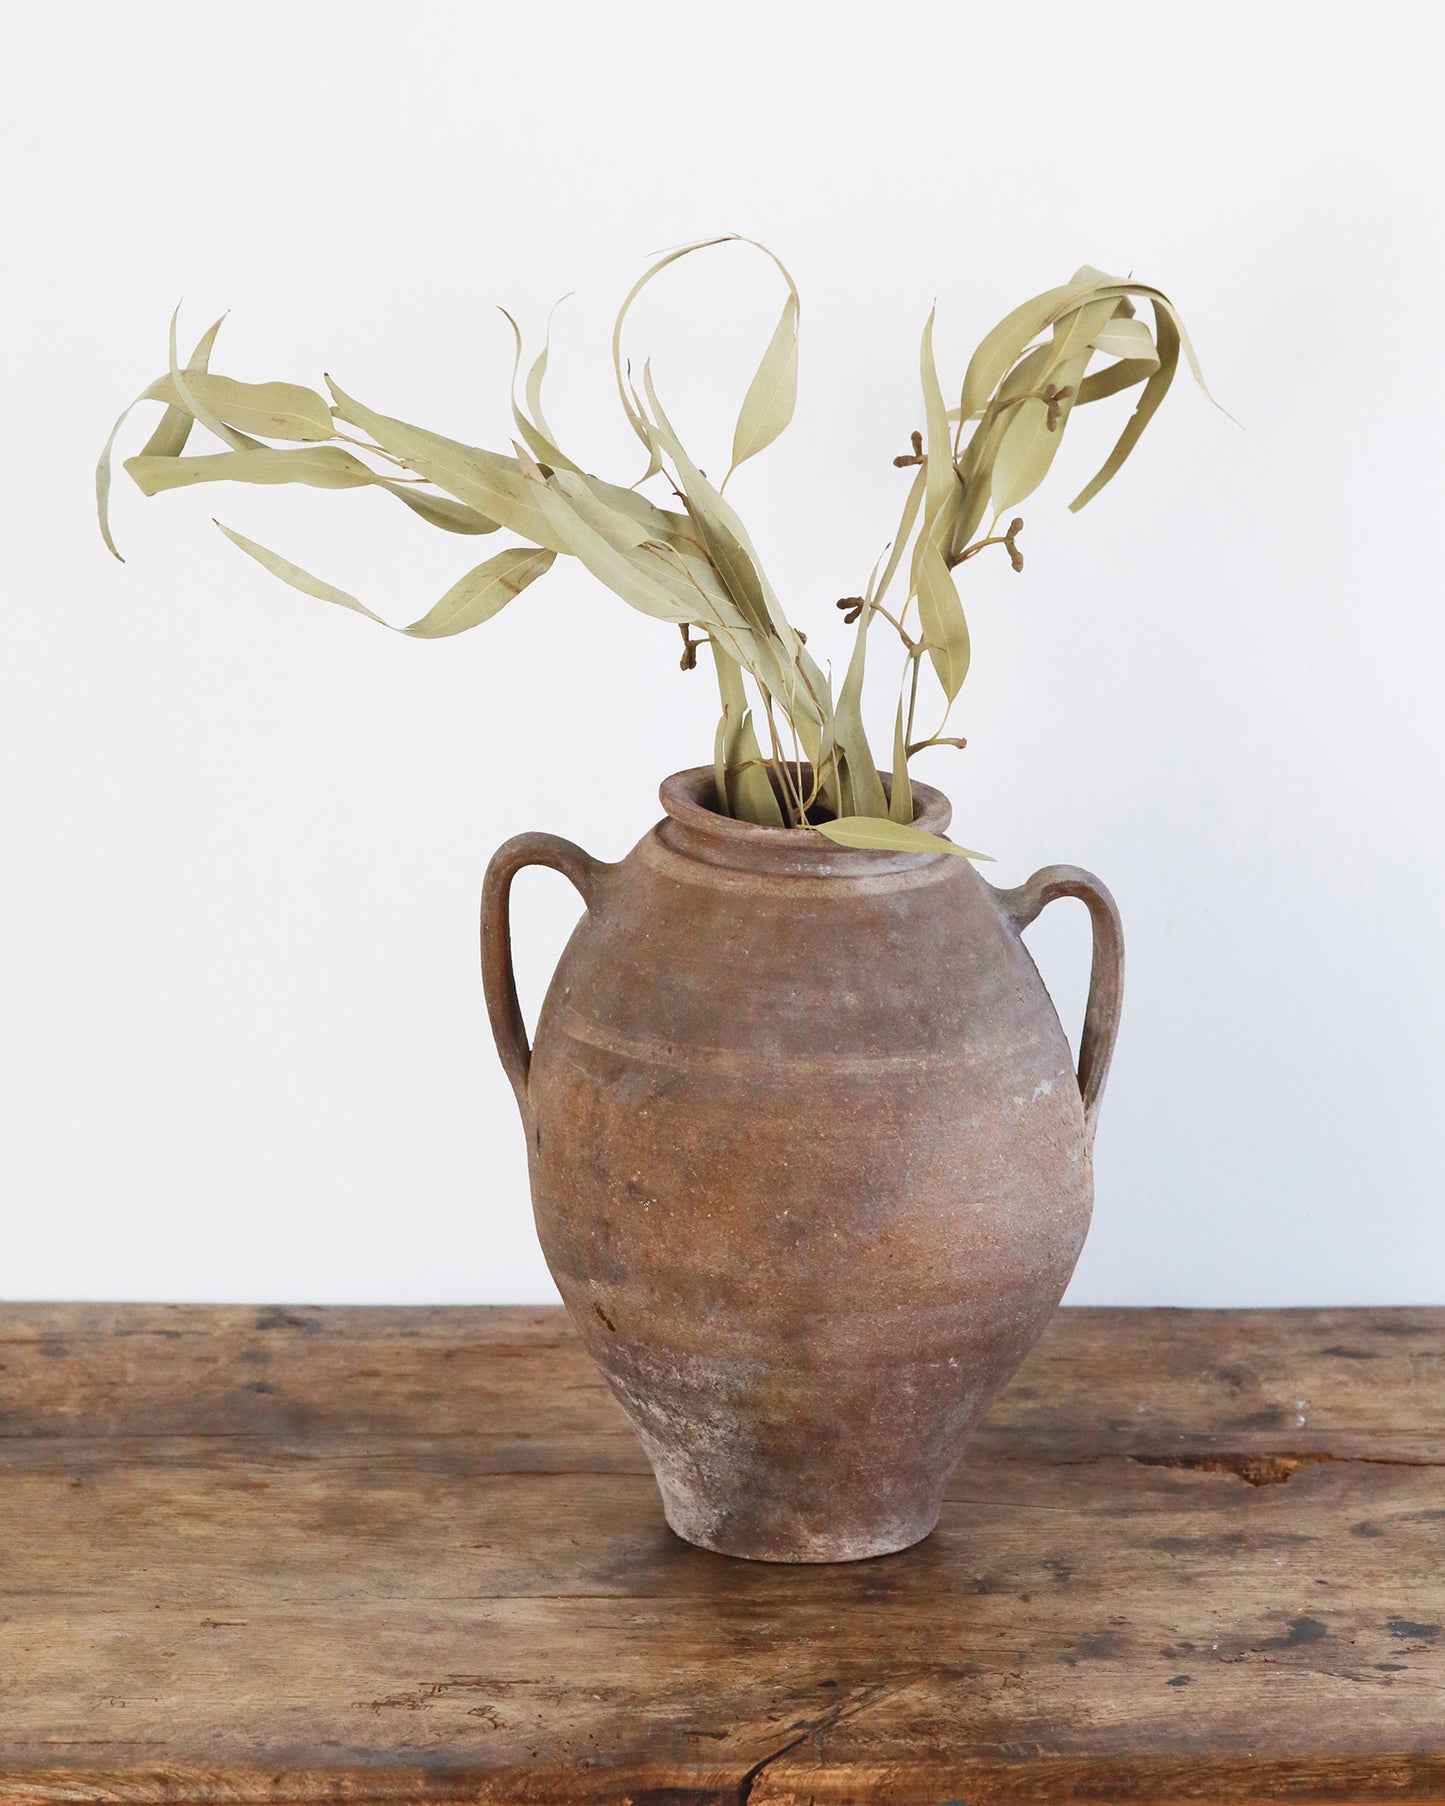 Rustic Mediterranean pot with handles used as vase with stems